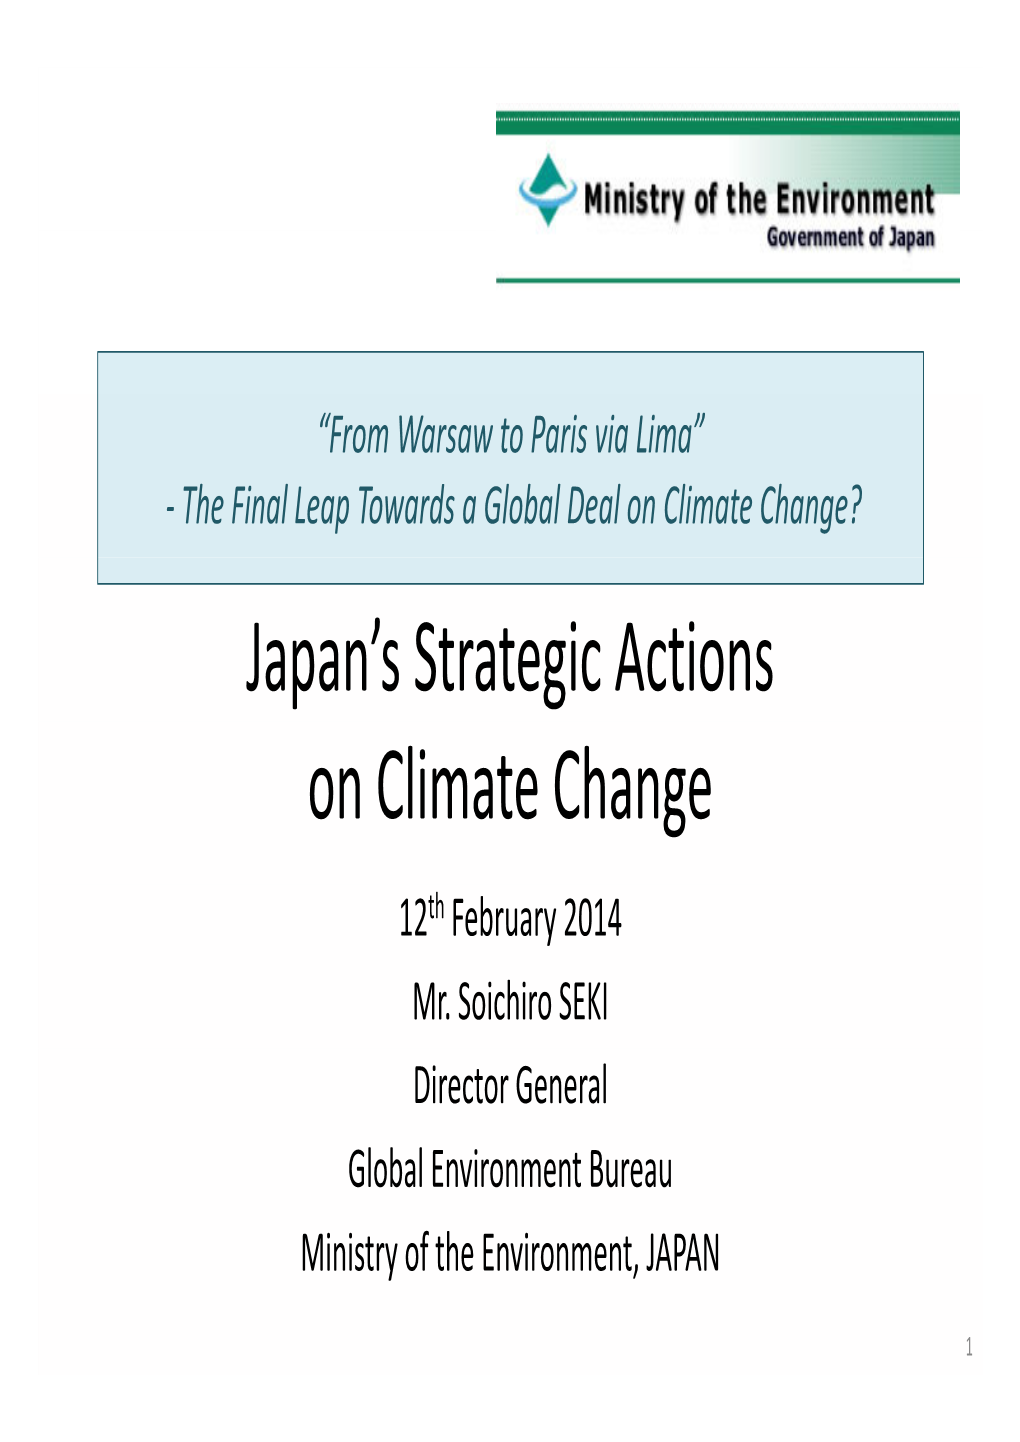 Japan's Strategic Actions on Climate Change